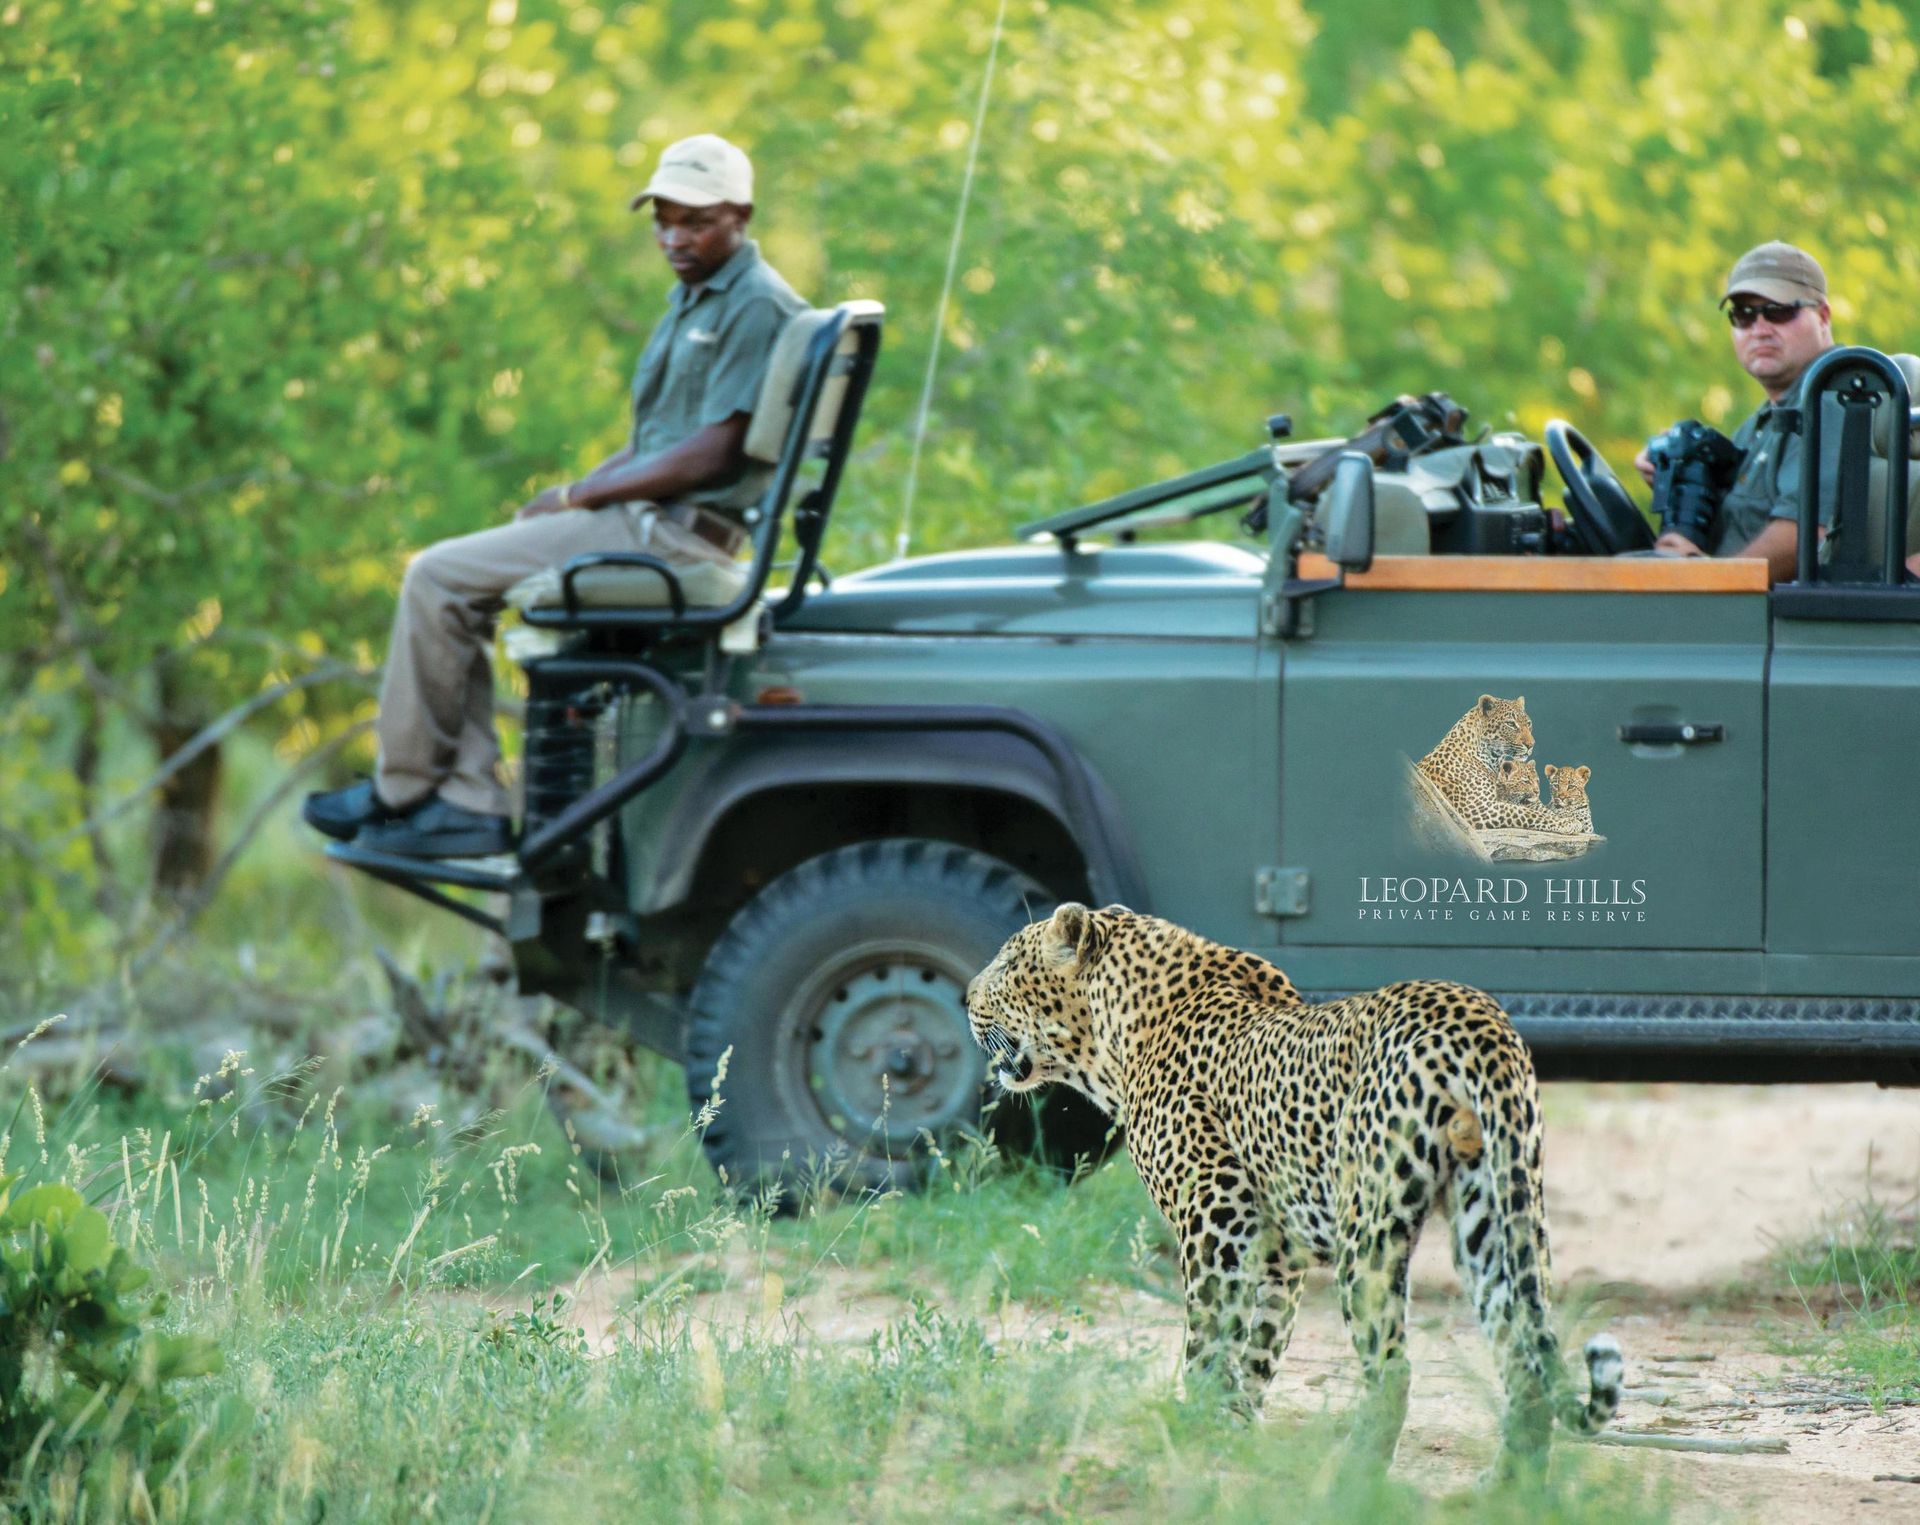 a leopard is standing in front of a safari vehicle with people in it .